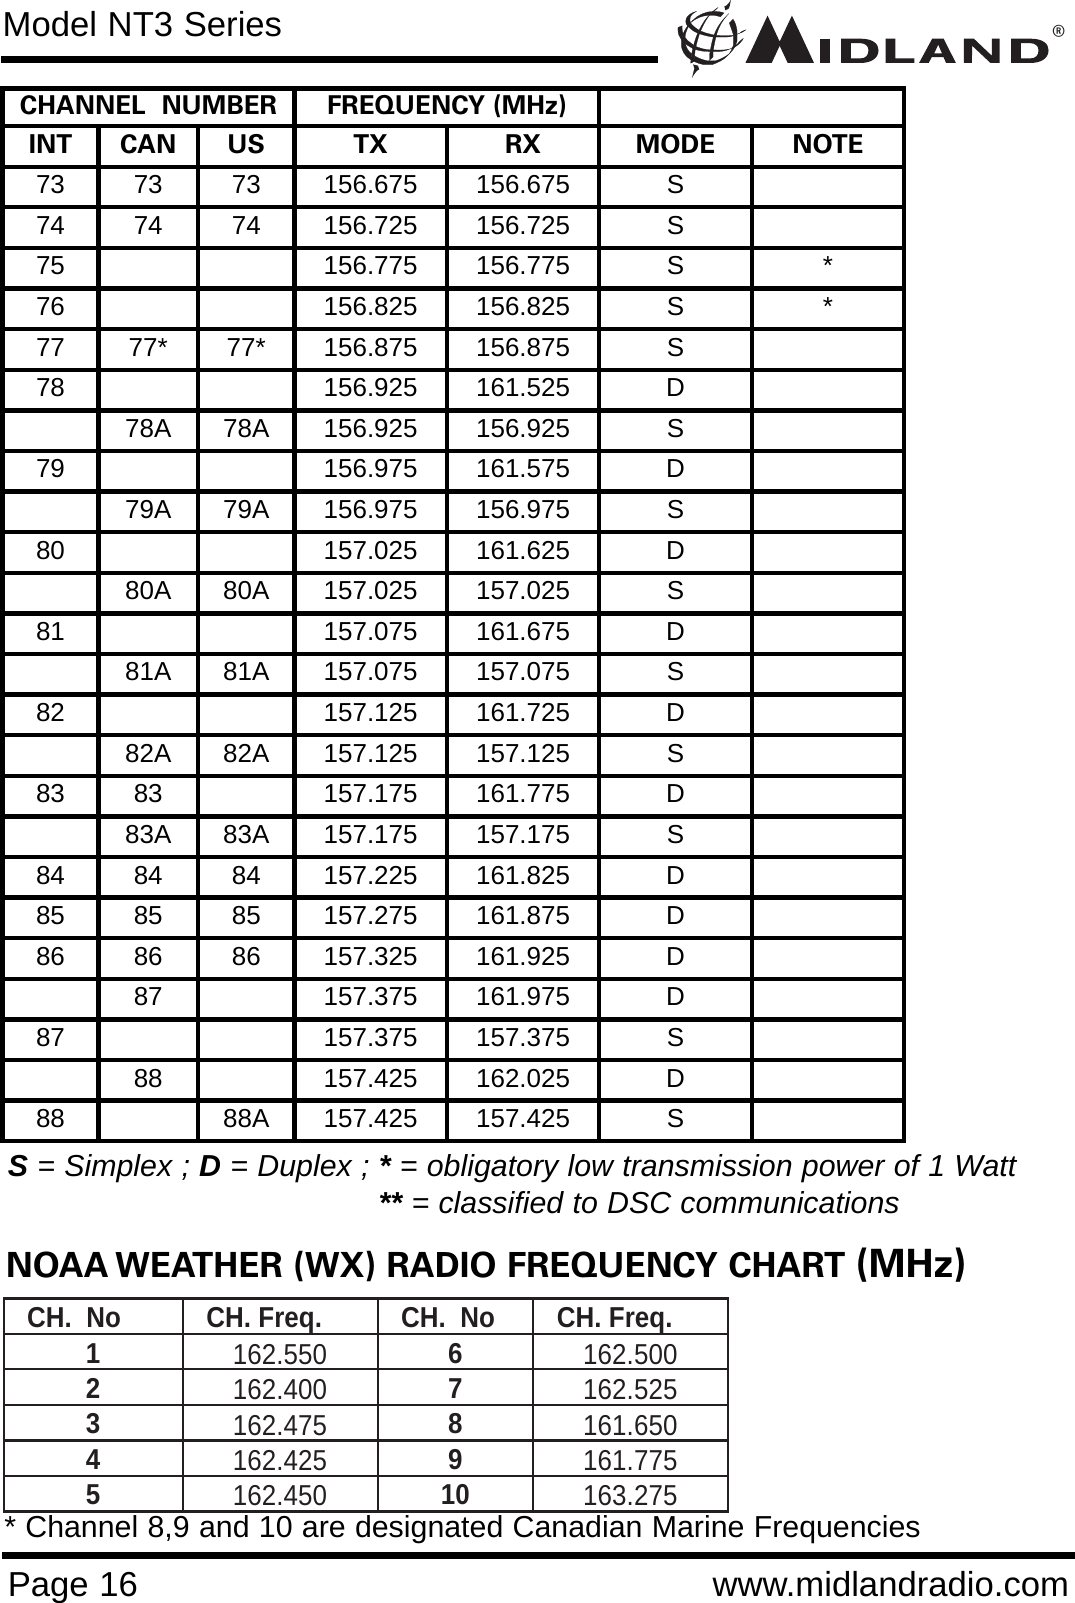 ®Page 16 www.midlandradio.comModel NT3 SeriesCHANNEL  NUMBER FREQUENCY (MHz)INT CAN US TX RX MODE NOTE73 73 73 156.675 156.675  S74 74 74 156.725 156.725 S75 156.775 156.775 S *76 156.825 156.825 S *77 77* 77* 156.875 156.875 S78 156.925  161.525 D78A 78A 156.925 156.925 S79 156.975 161.575 D79A 79A 156.975 156.975 S80 157.025 161.625 D80A 80A 157.025 157.025 S81 157.075 161.675 D81A 81A 157.075 157.075 S82 157.125 161.725  D82A 82A 157.125 157.125 S83 83 157.175 161.775 D83A 83A 157.175 157.175 S84 84 84 157.225 161.825 D85 85 85 157.275 161.875 D86 86 86 157.325 161.925  D87 157.375 161.975 D87 157.375 157.375 S88 157.425  162.025 D88 88A 157.425  157.425  SCH.  No  CH. Freq.  CH.  No  CH. Freq. 1  162.550 6  162.500 2  162.400 7  162.525 3  162.475 8  161.650 4  162.425 9  161.775 5  162.450 10  163.275 NOAA WEATHER (WX) RADIO FREQUENCY CHART (MHz)* Channel 8,9 and 10 are designated Canadian Marine FrequenciesS= Simplex ; D= Duplex ; *= obligatory low transmission power of 1 Watt** = classified to DSC communications